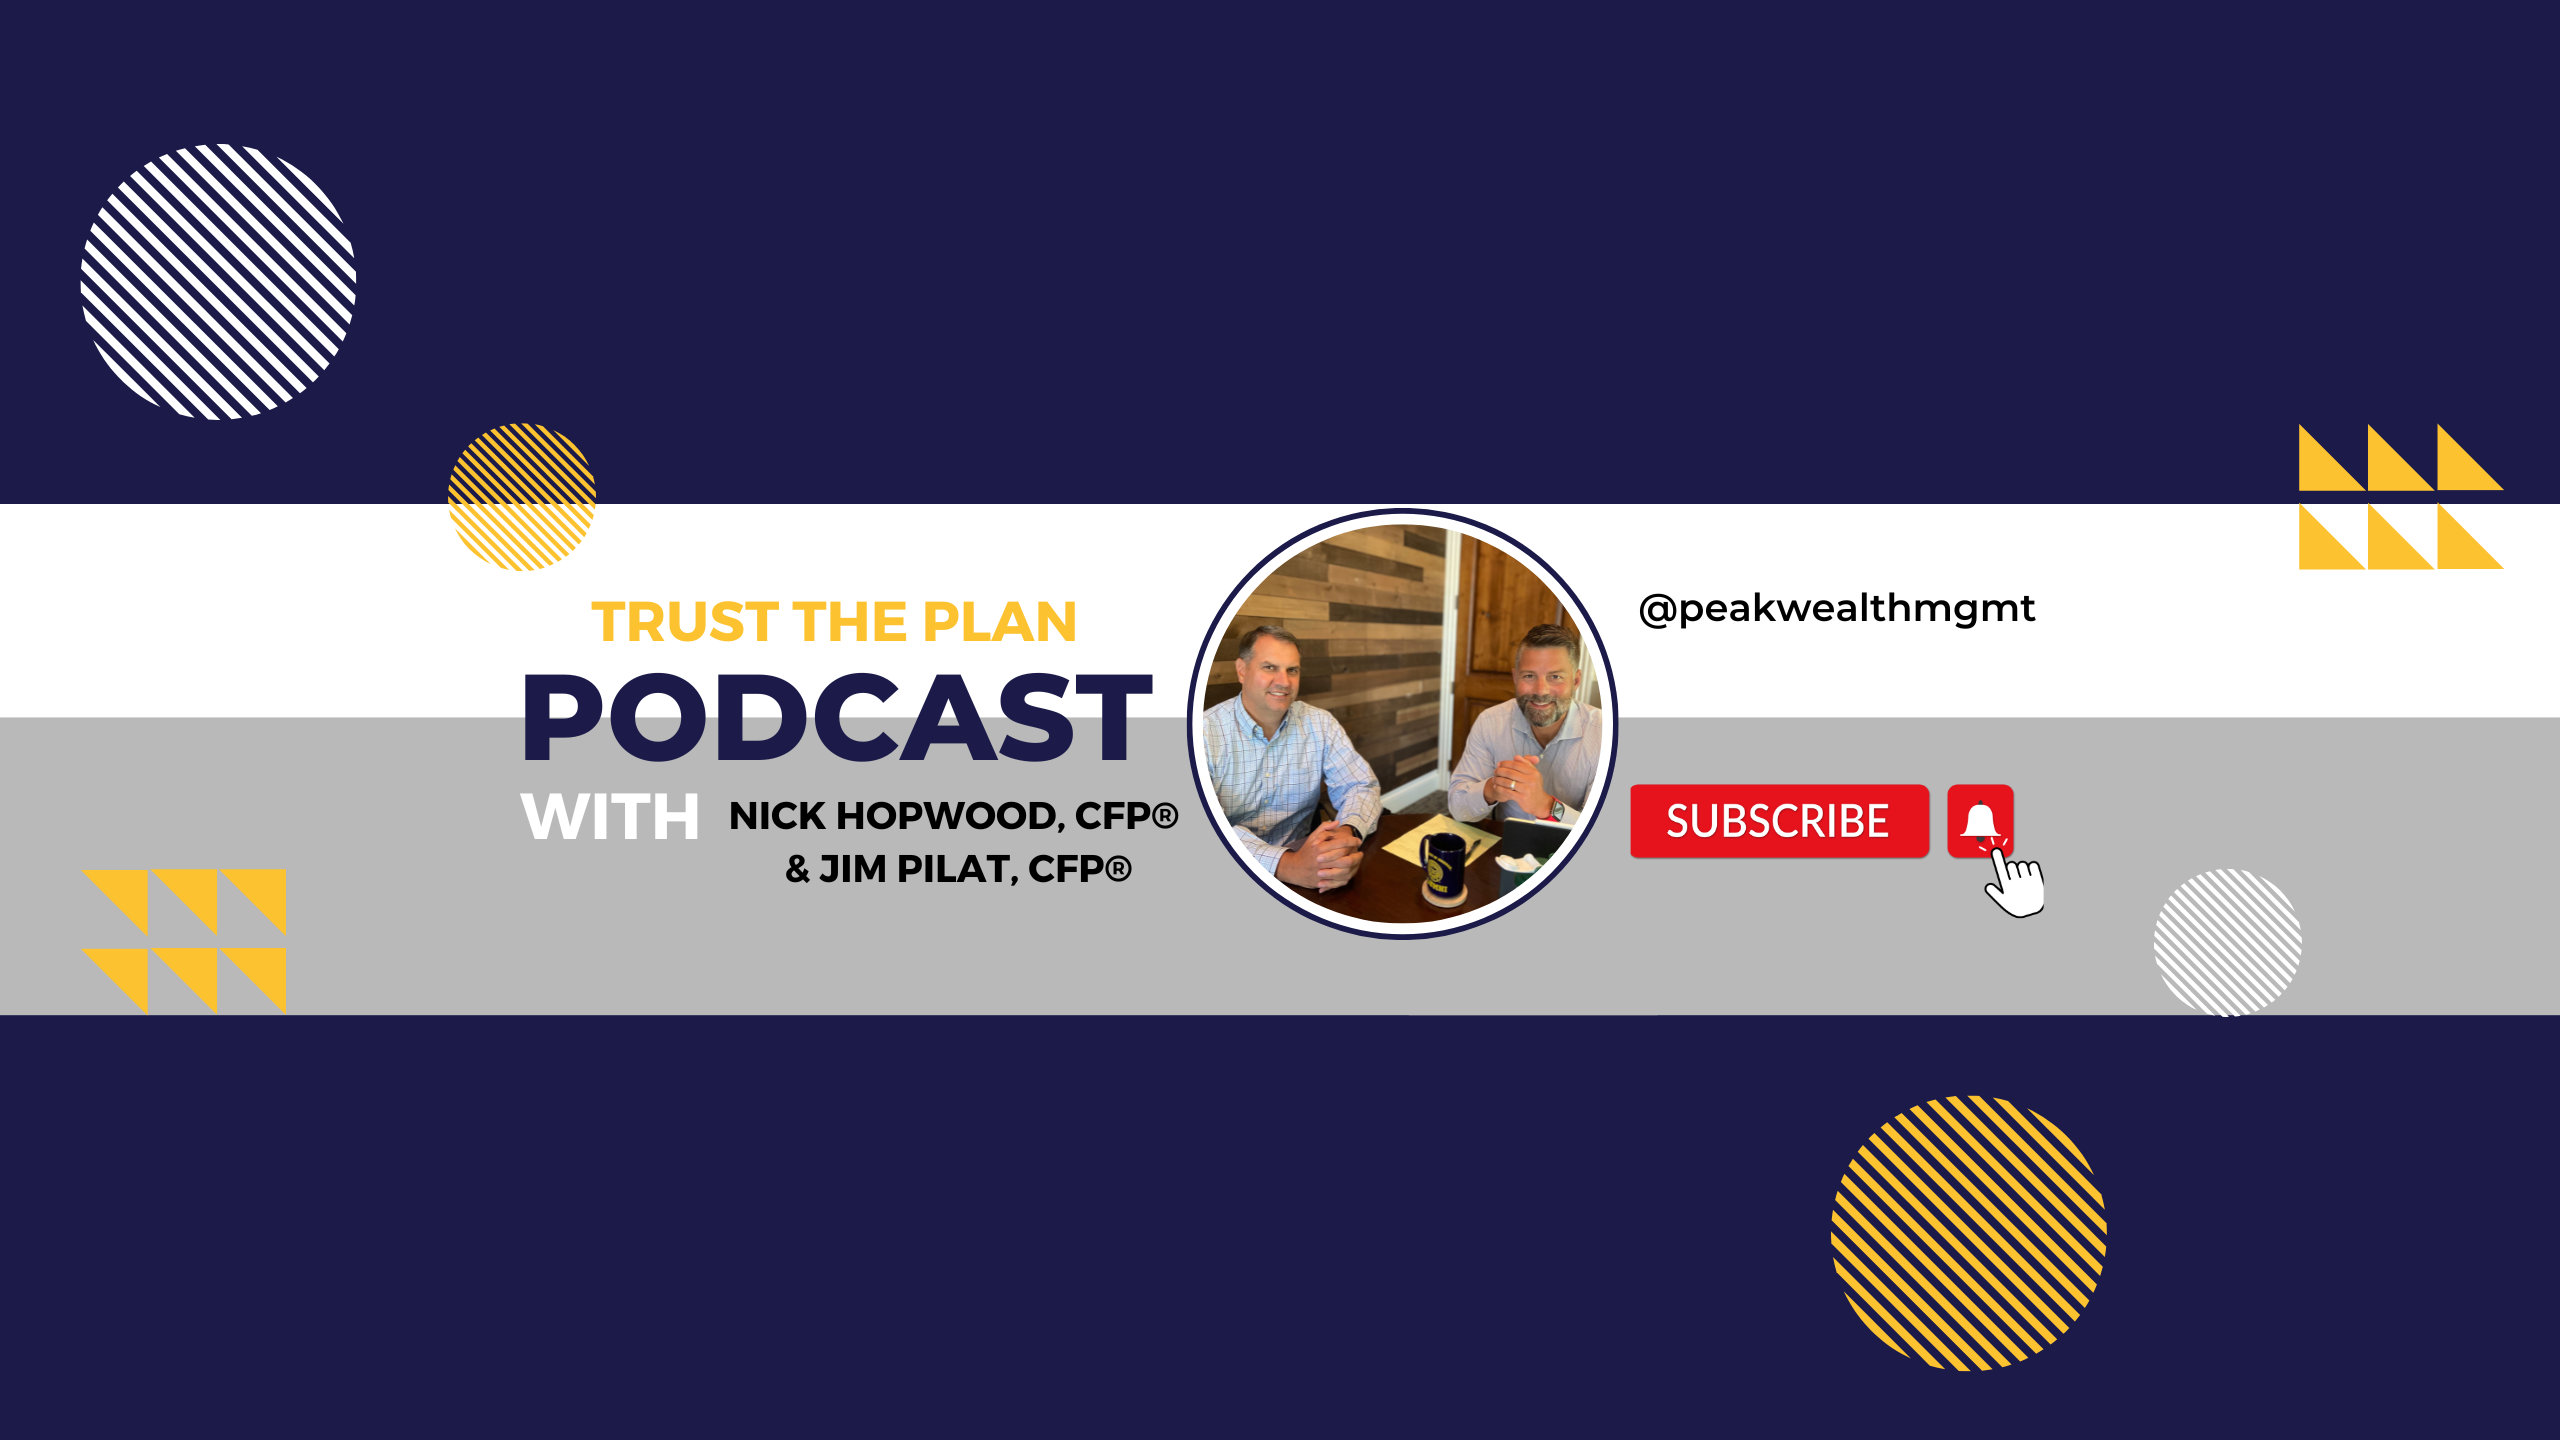 Trust the Plan Podcast with Nick Hopwood, CFP® and Jim Pilat, CFP®